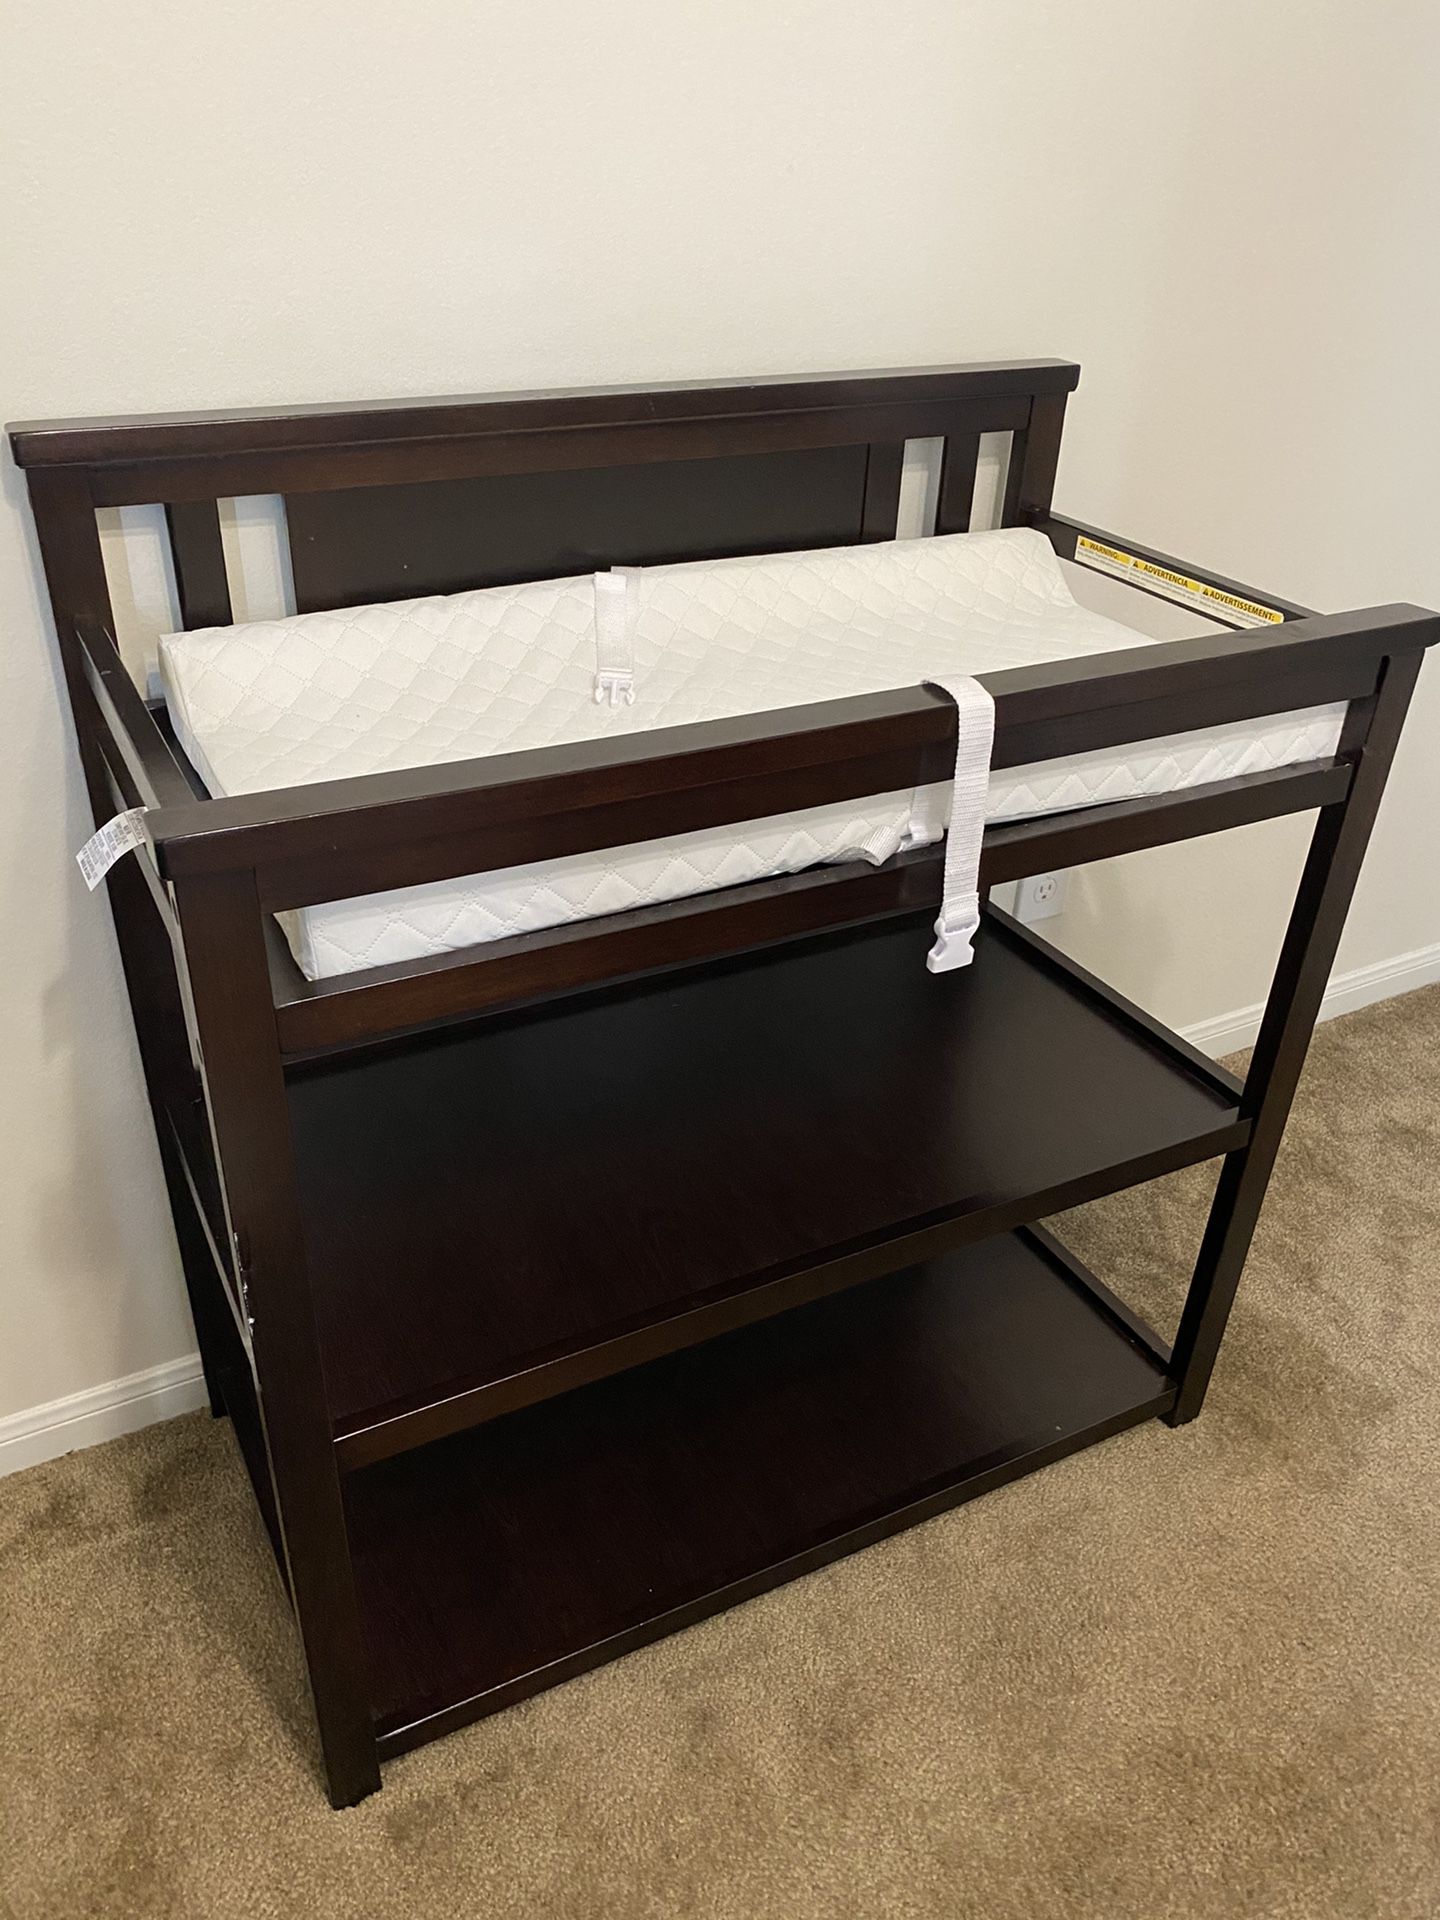 $50 changing table and pad